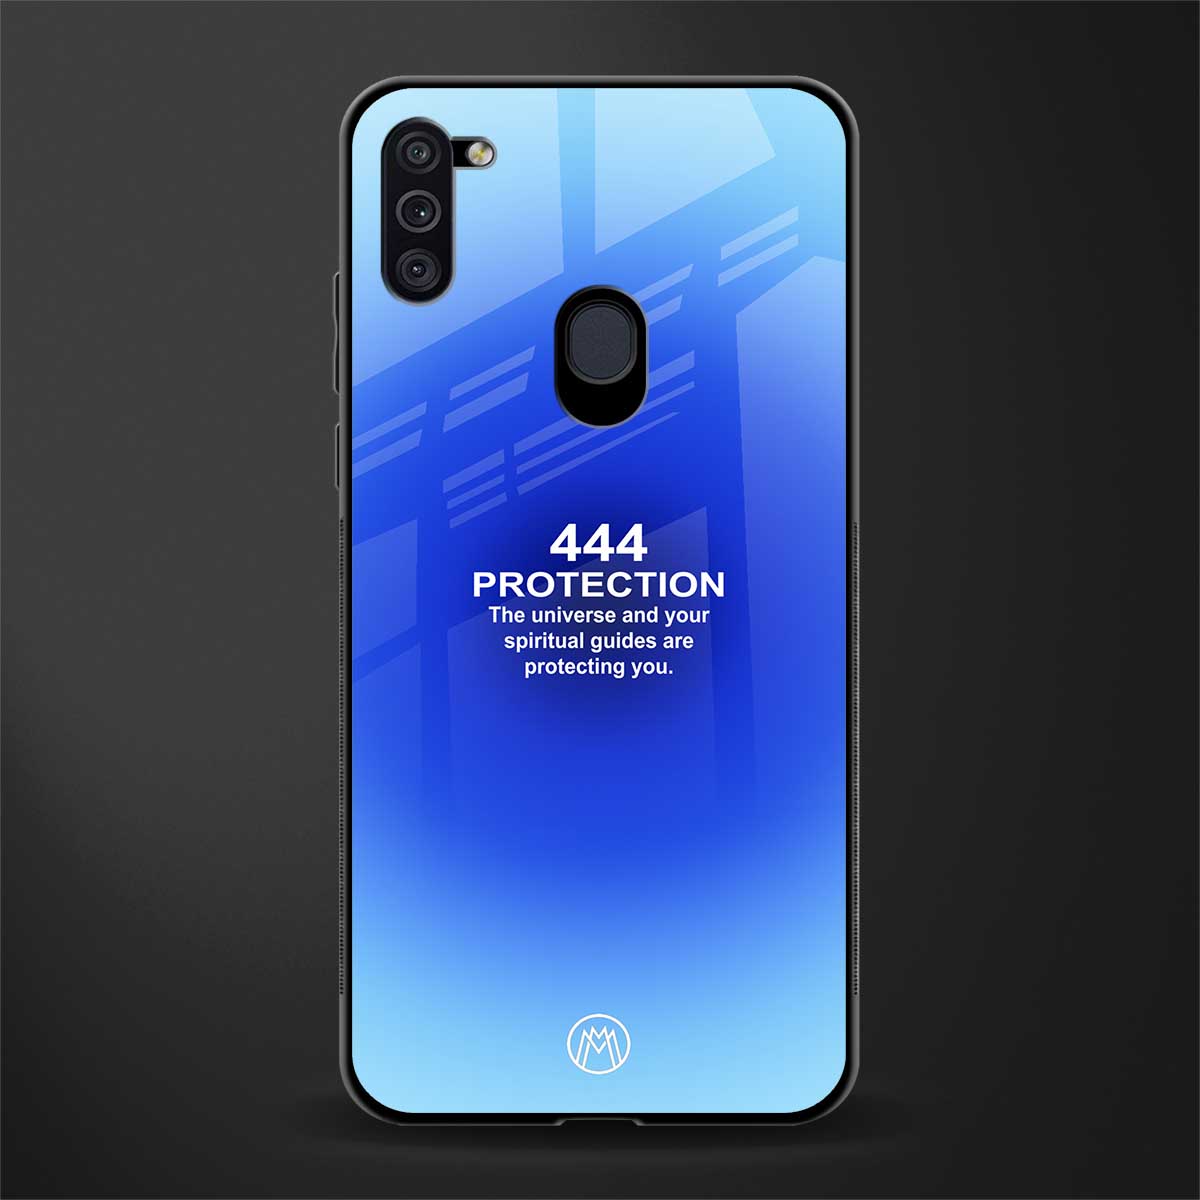 444 protection glass case for samsung a11 image